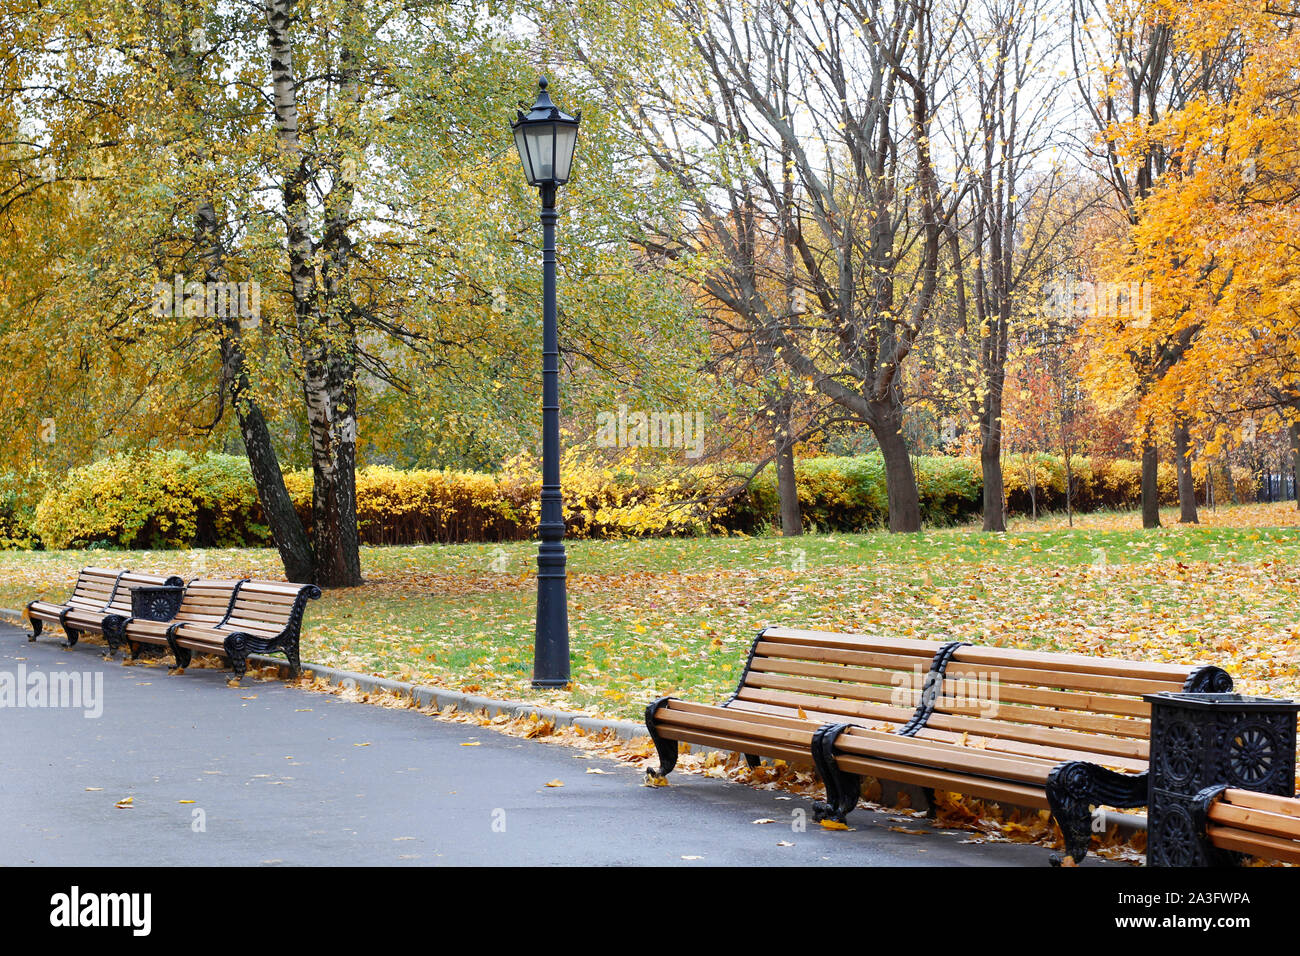 City park in the fall. Benches in the autumn park. Autumn landscape. Warm peaceful day in the autumn park. Nobody here. Autumn card. Stock Photo